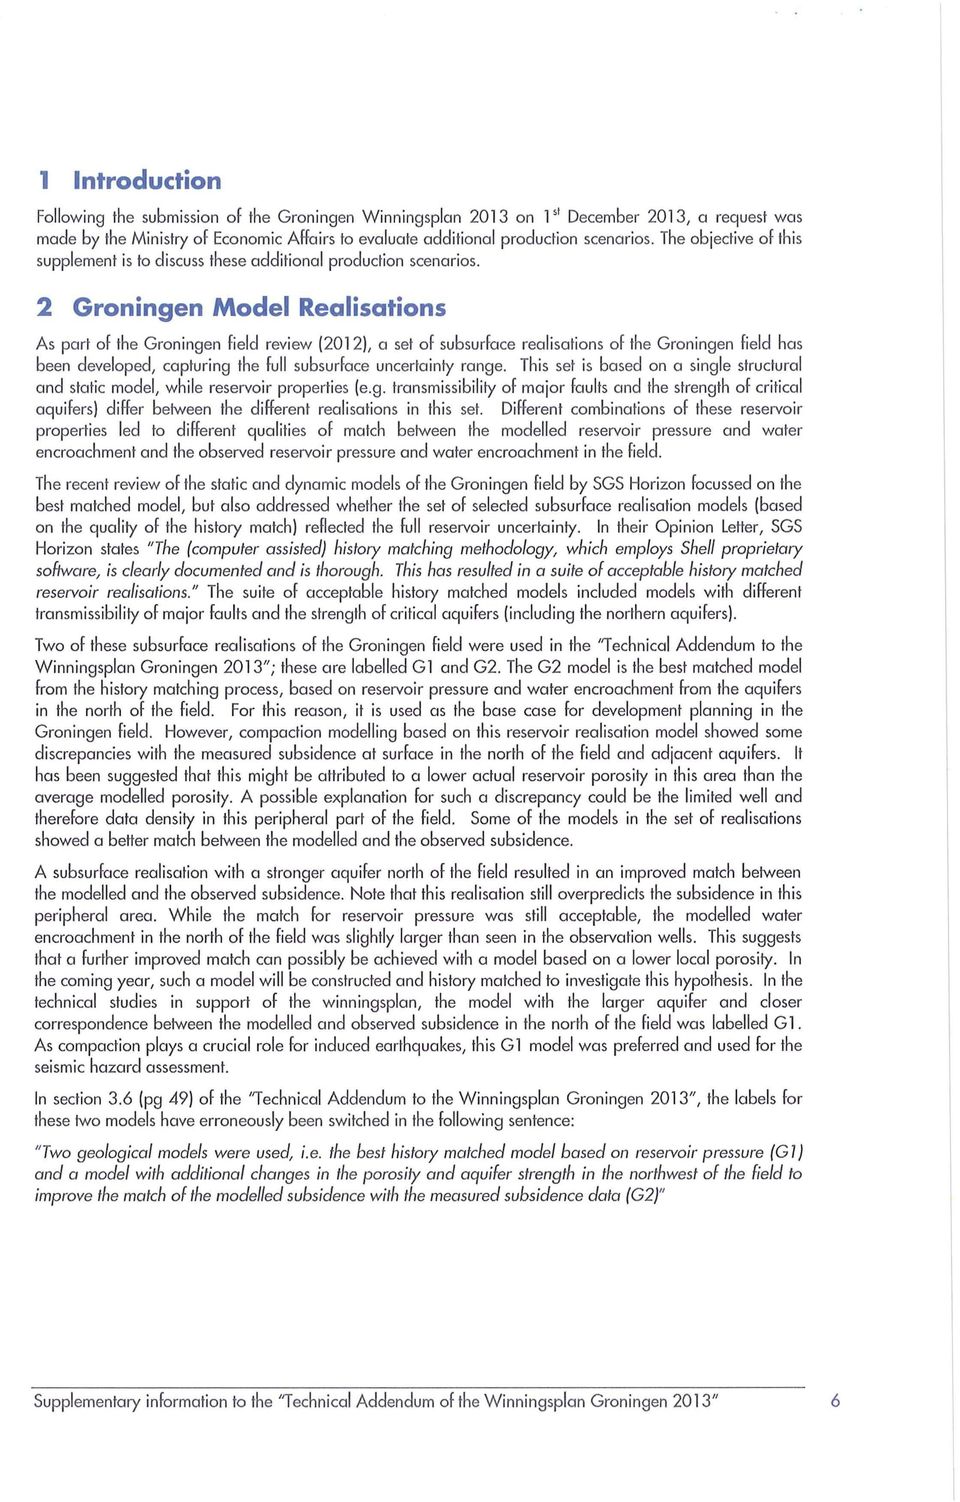 2 Groningen Model Realisations As part of the Groningen fi eld review (201 2), a set of subsurface rea lisations of the Groningen fi eld has been developed, capturing the full subsurface uncertainty